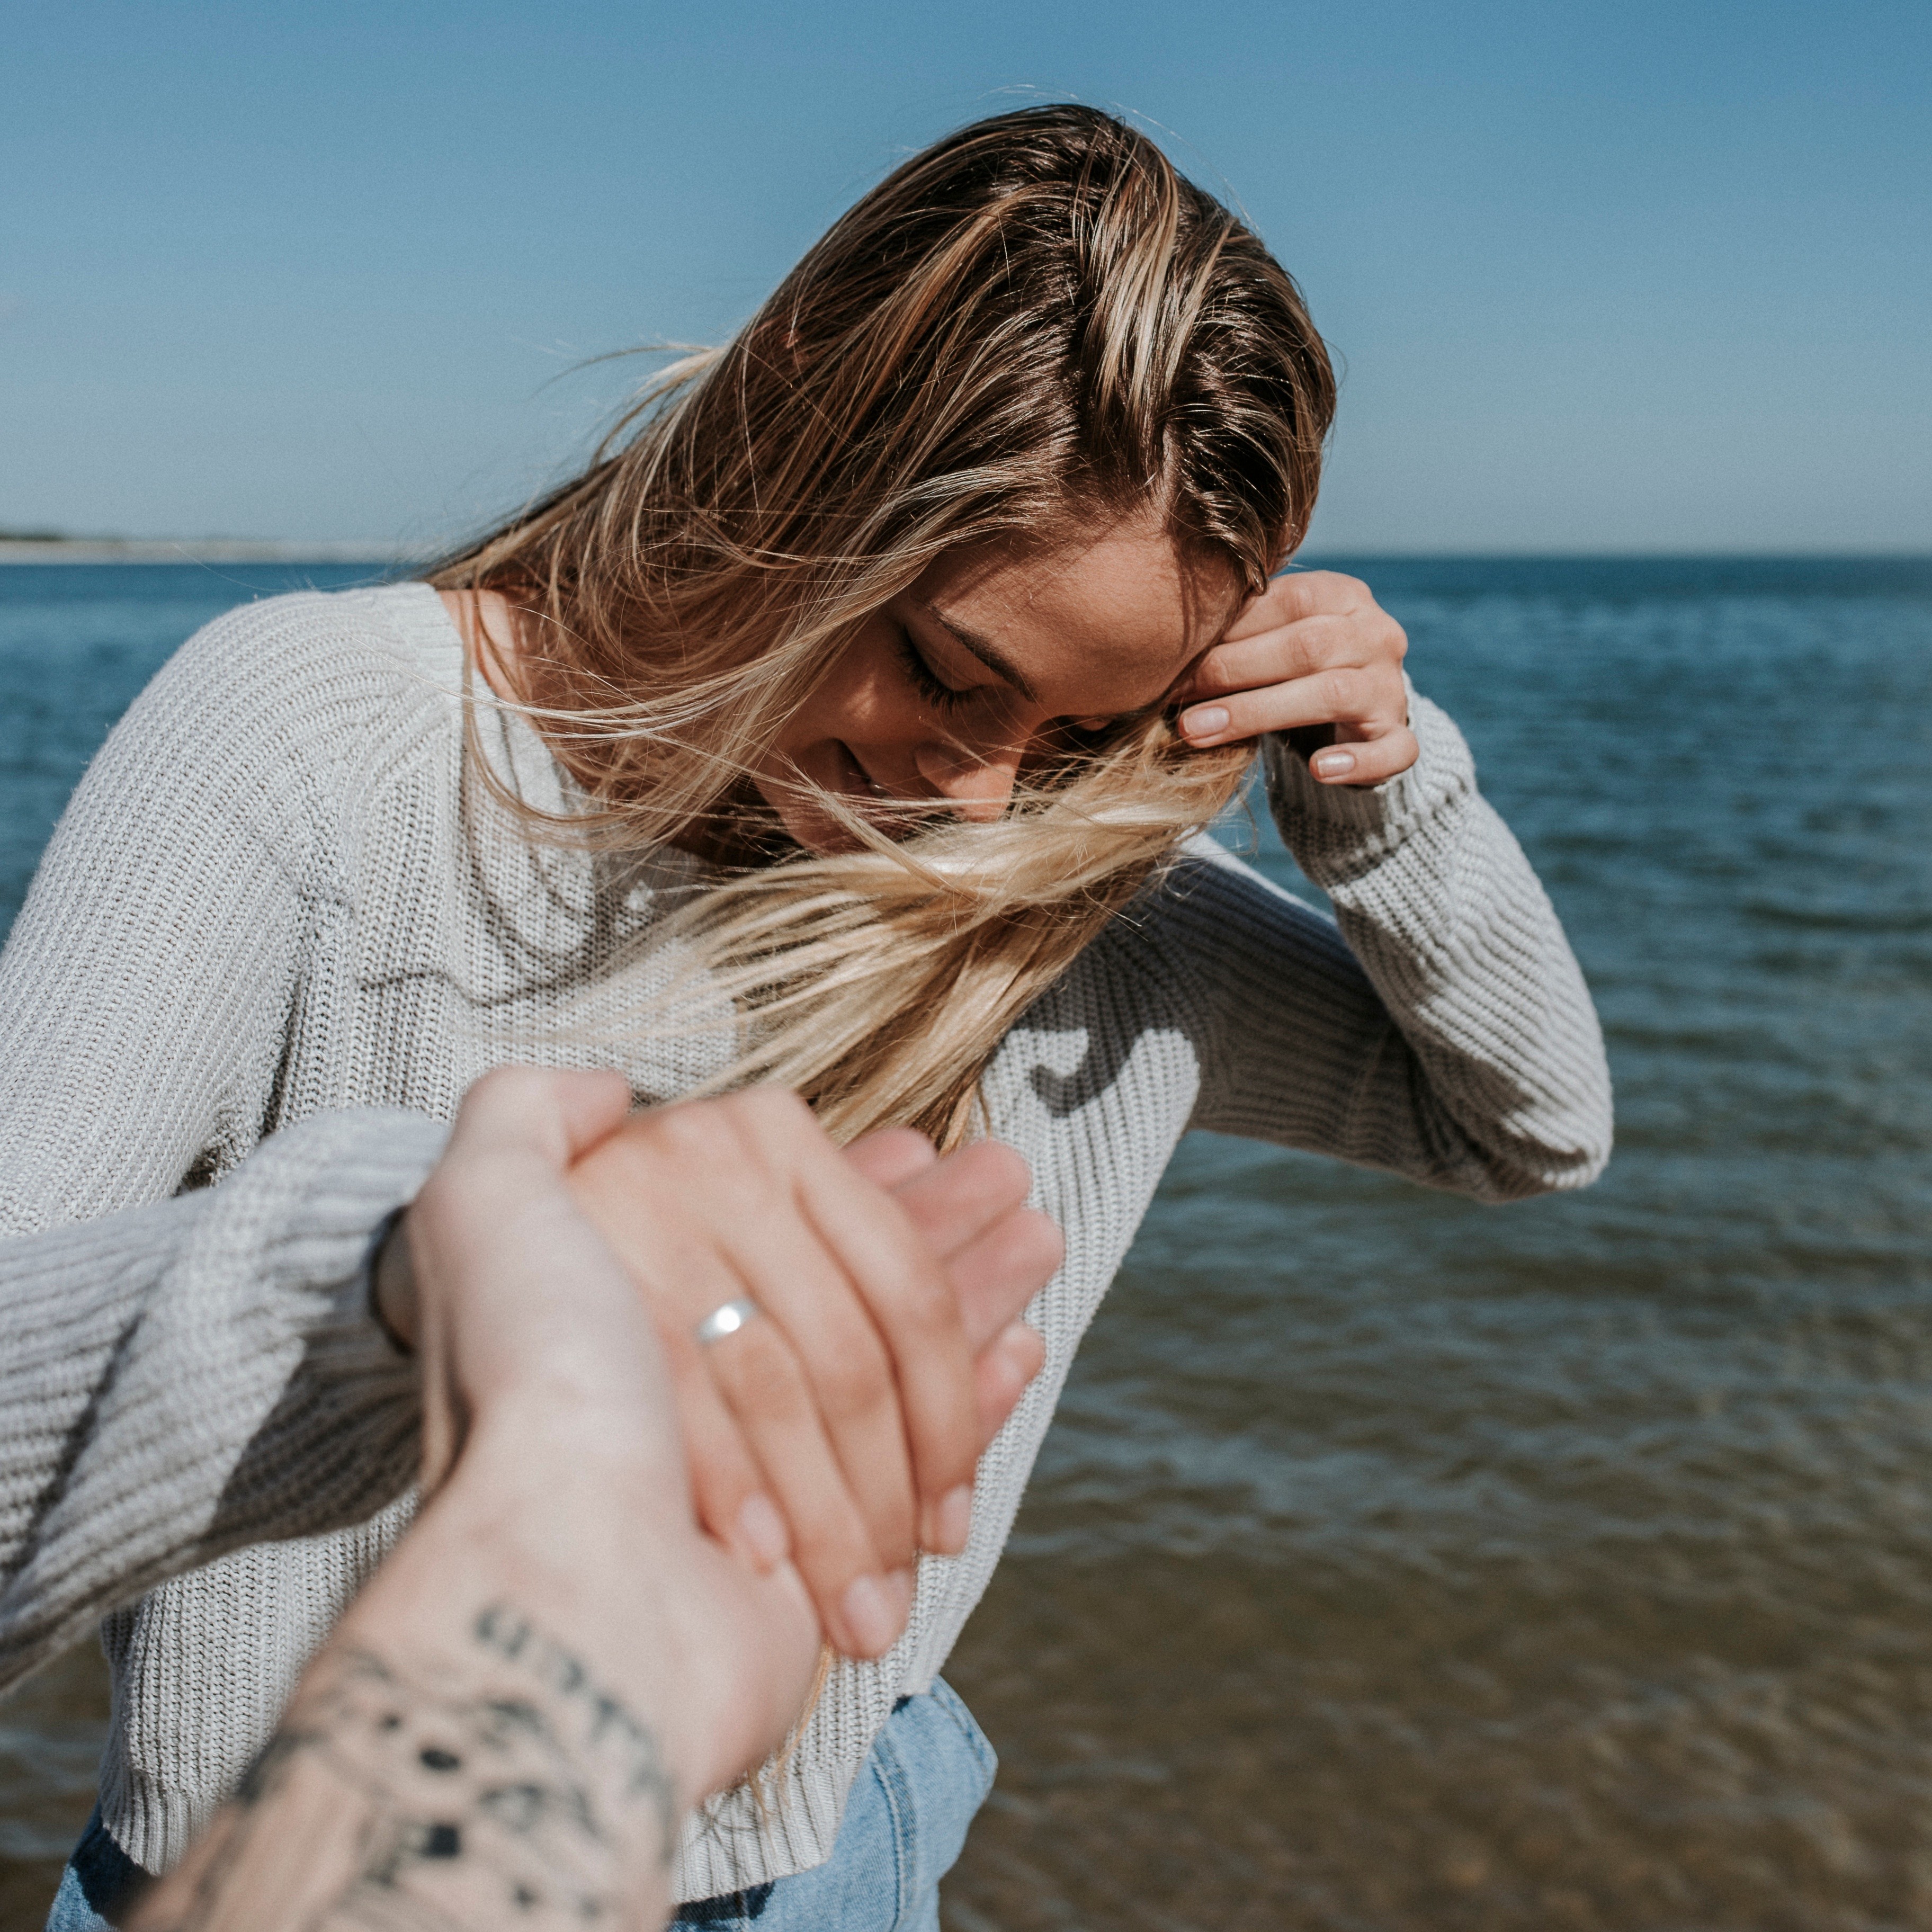 People 3648x3648 photography blonde sweater beach rings windy hands hair blowing in the wind couple holding hands white sweater happy women on beach women POV